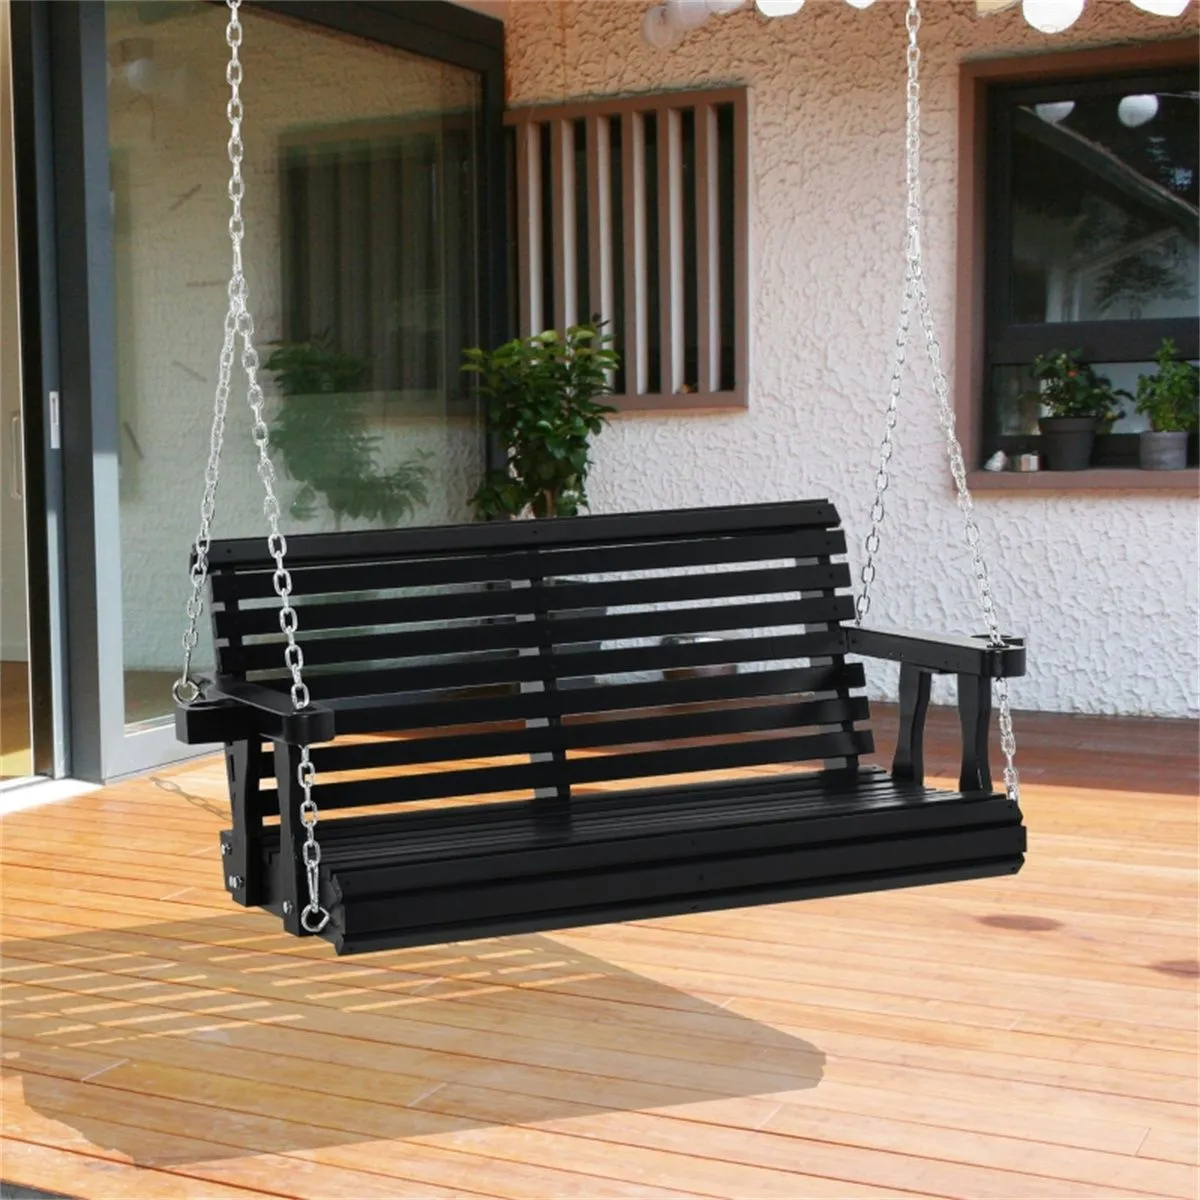 2 Seater Outdoor Patio Swing Chair-Black